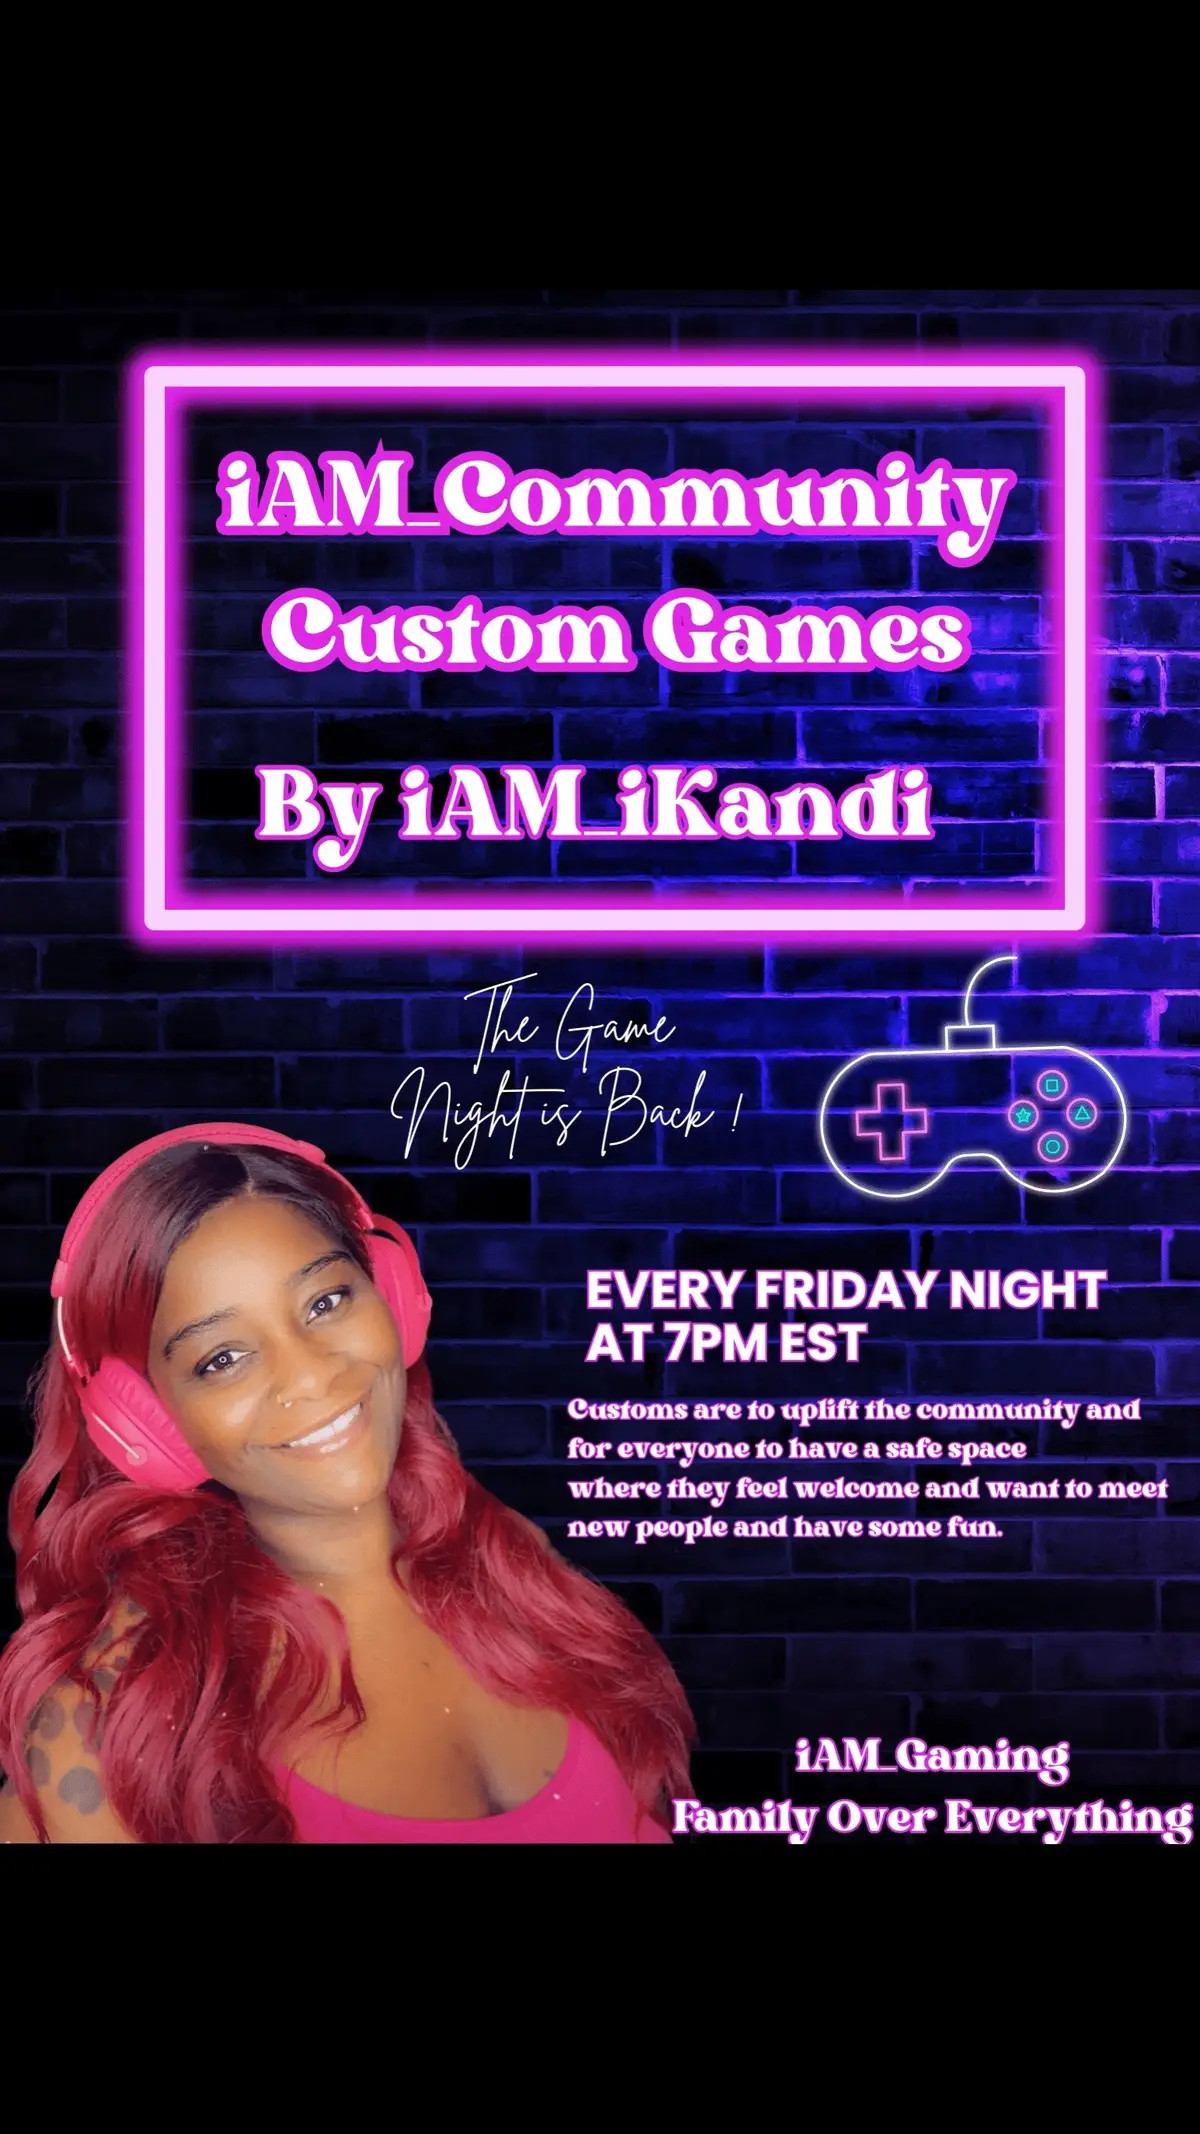 Tonight on the purple app we need 30 for BR 6pm cst ill also be libe on my new page @iAM_iKandi_Gaming so make sure yall go follow if you havent already #iamgaming #fyp #apexlegends #blackgirlgamer #apexlegendsclips 